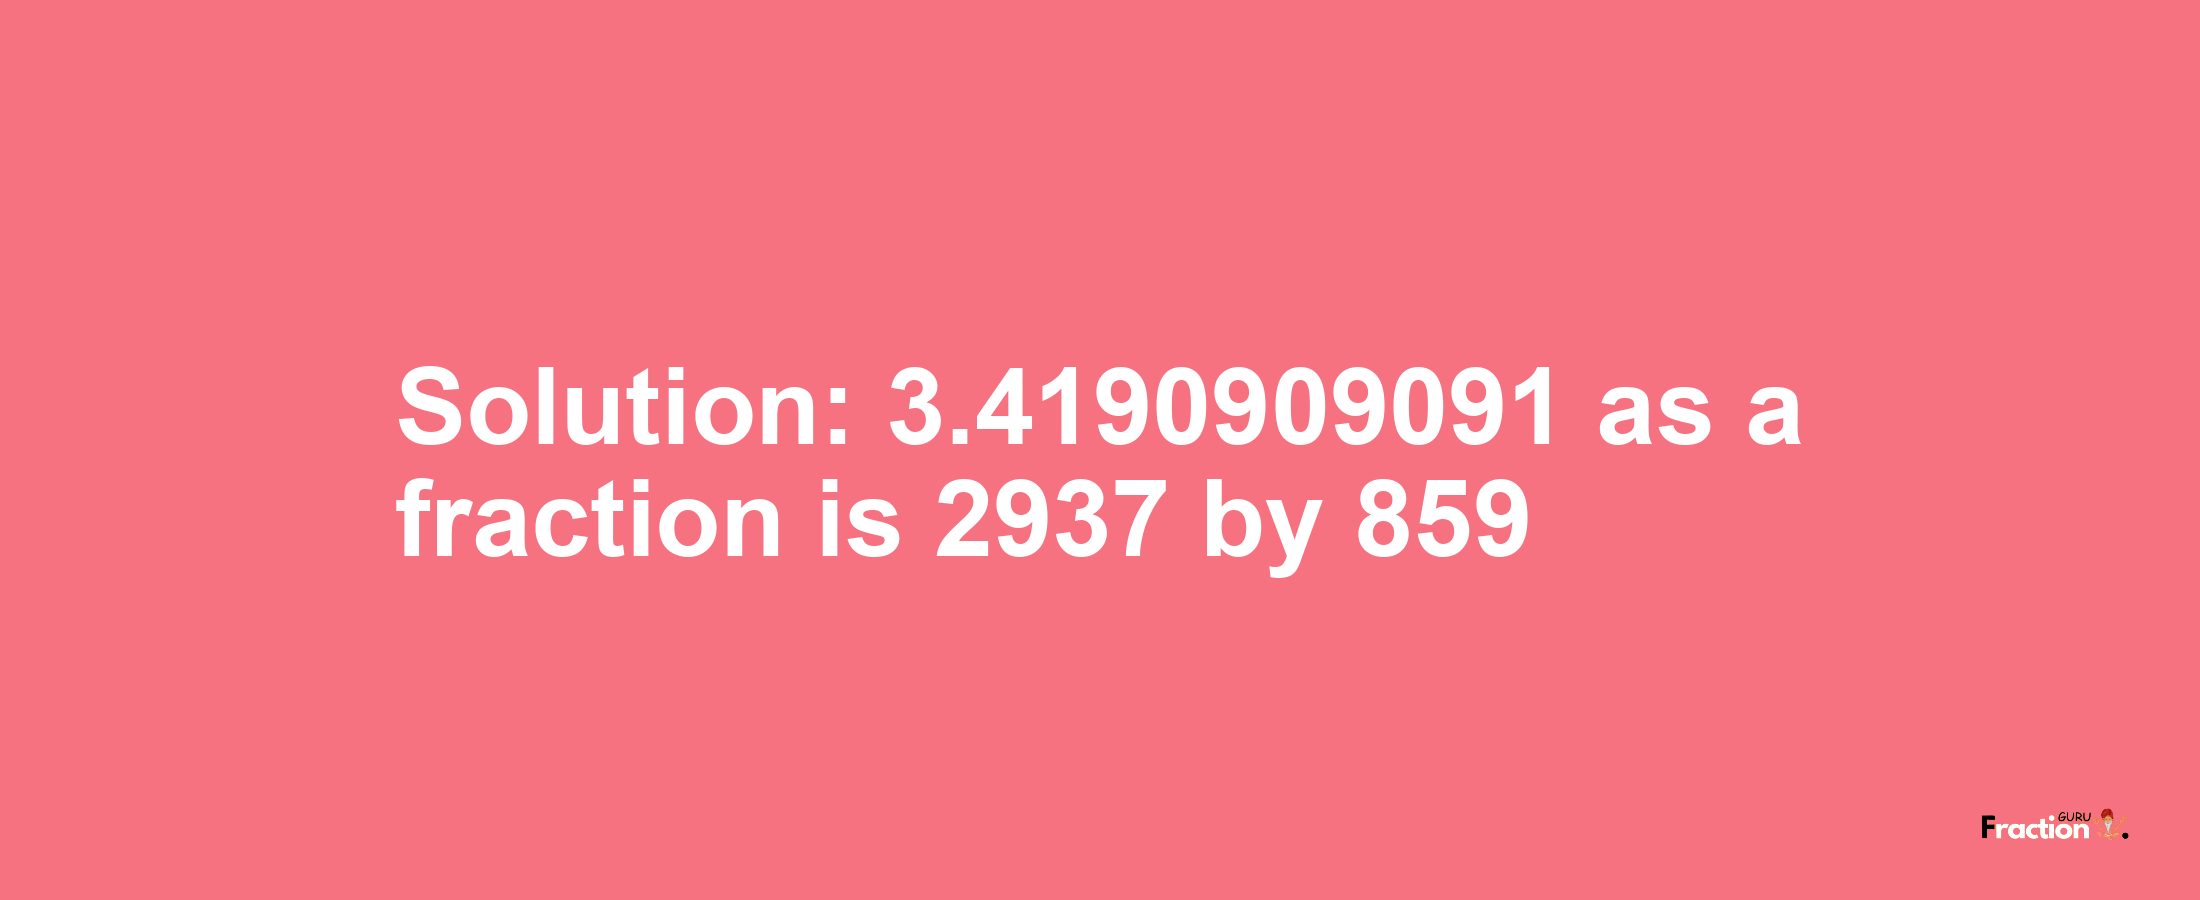 Solution:3.4190909091 as a fraction is 2937/859